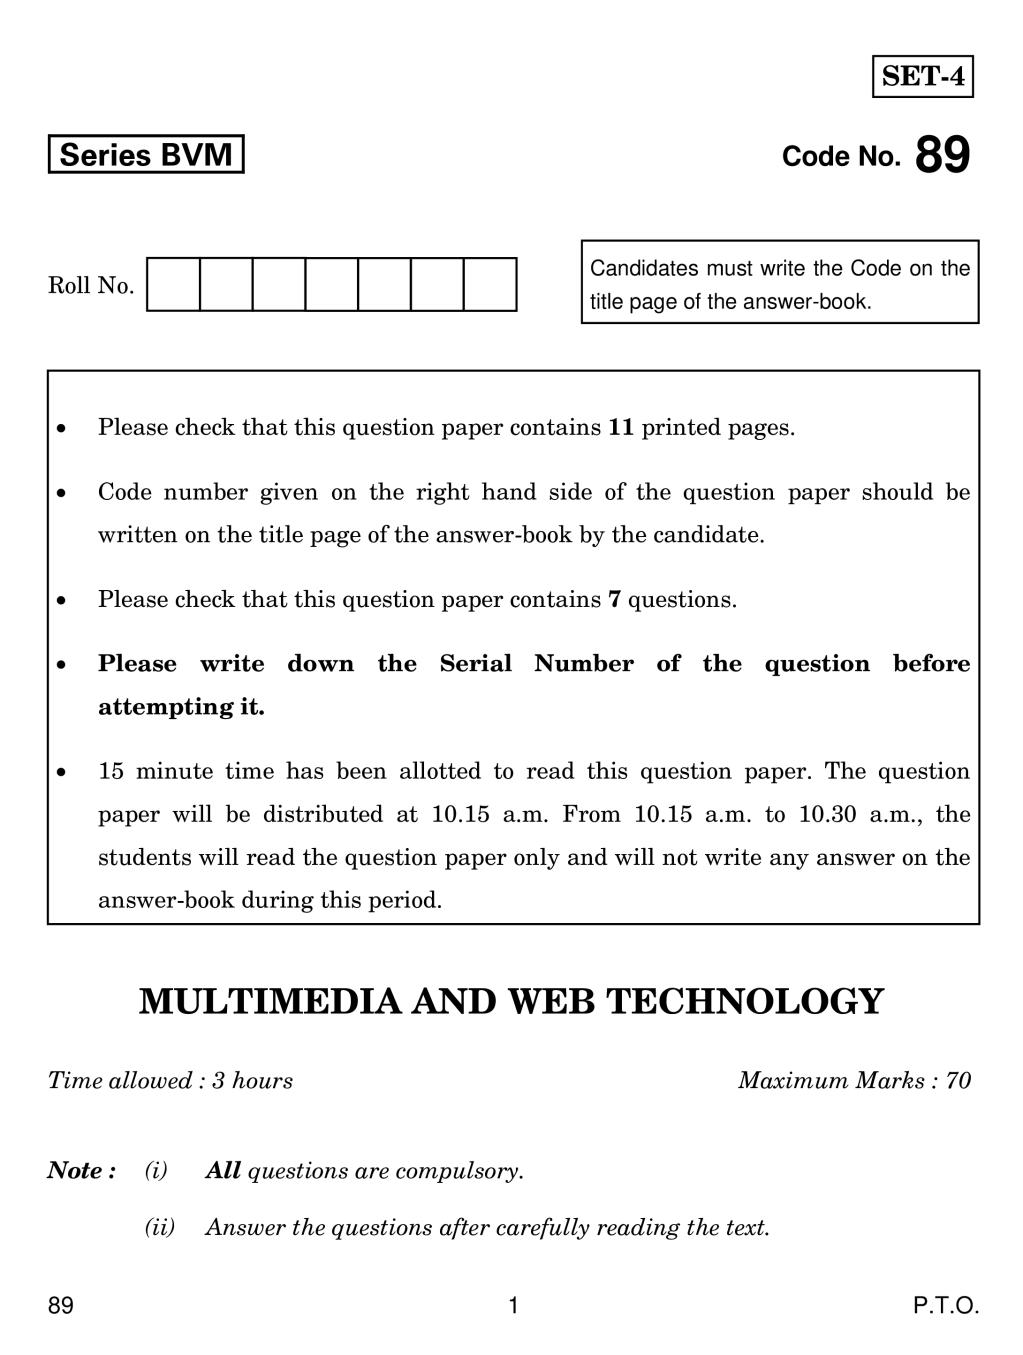 CBSE Class 12 Multimedia and Web Technology Question Paper 2019 - Page 1